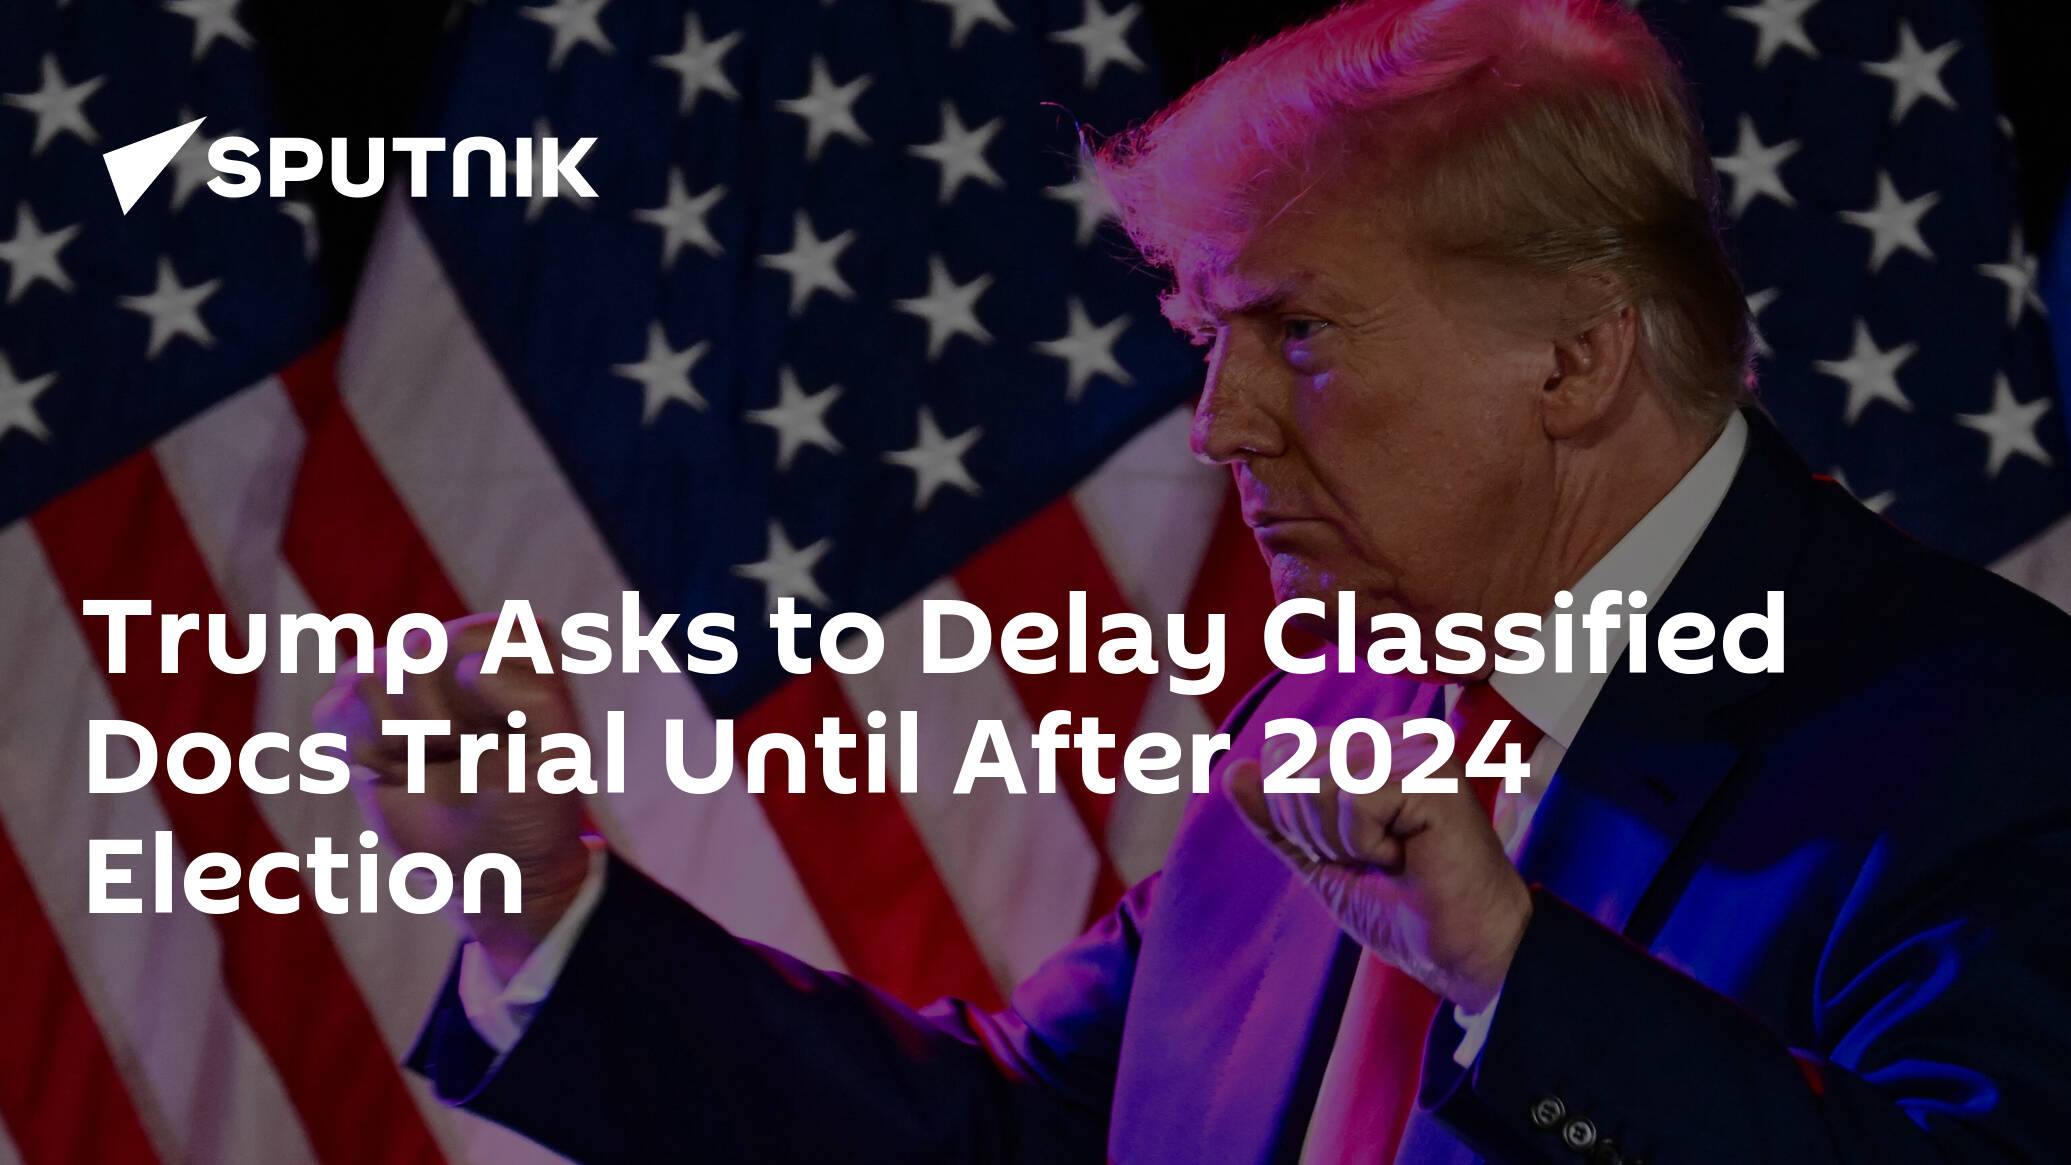 Trump Asks to Delay Classified Docs Trial Until After 2024 Election